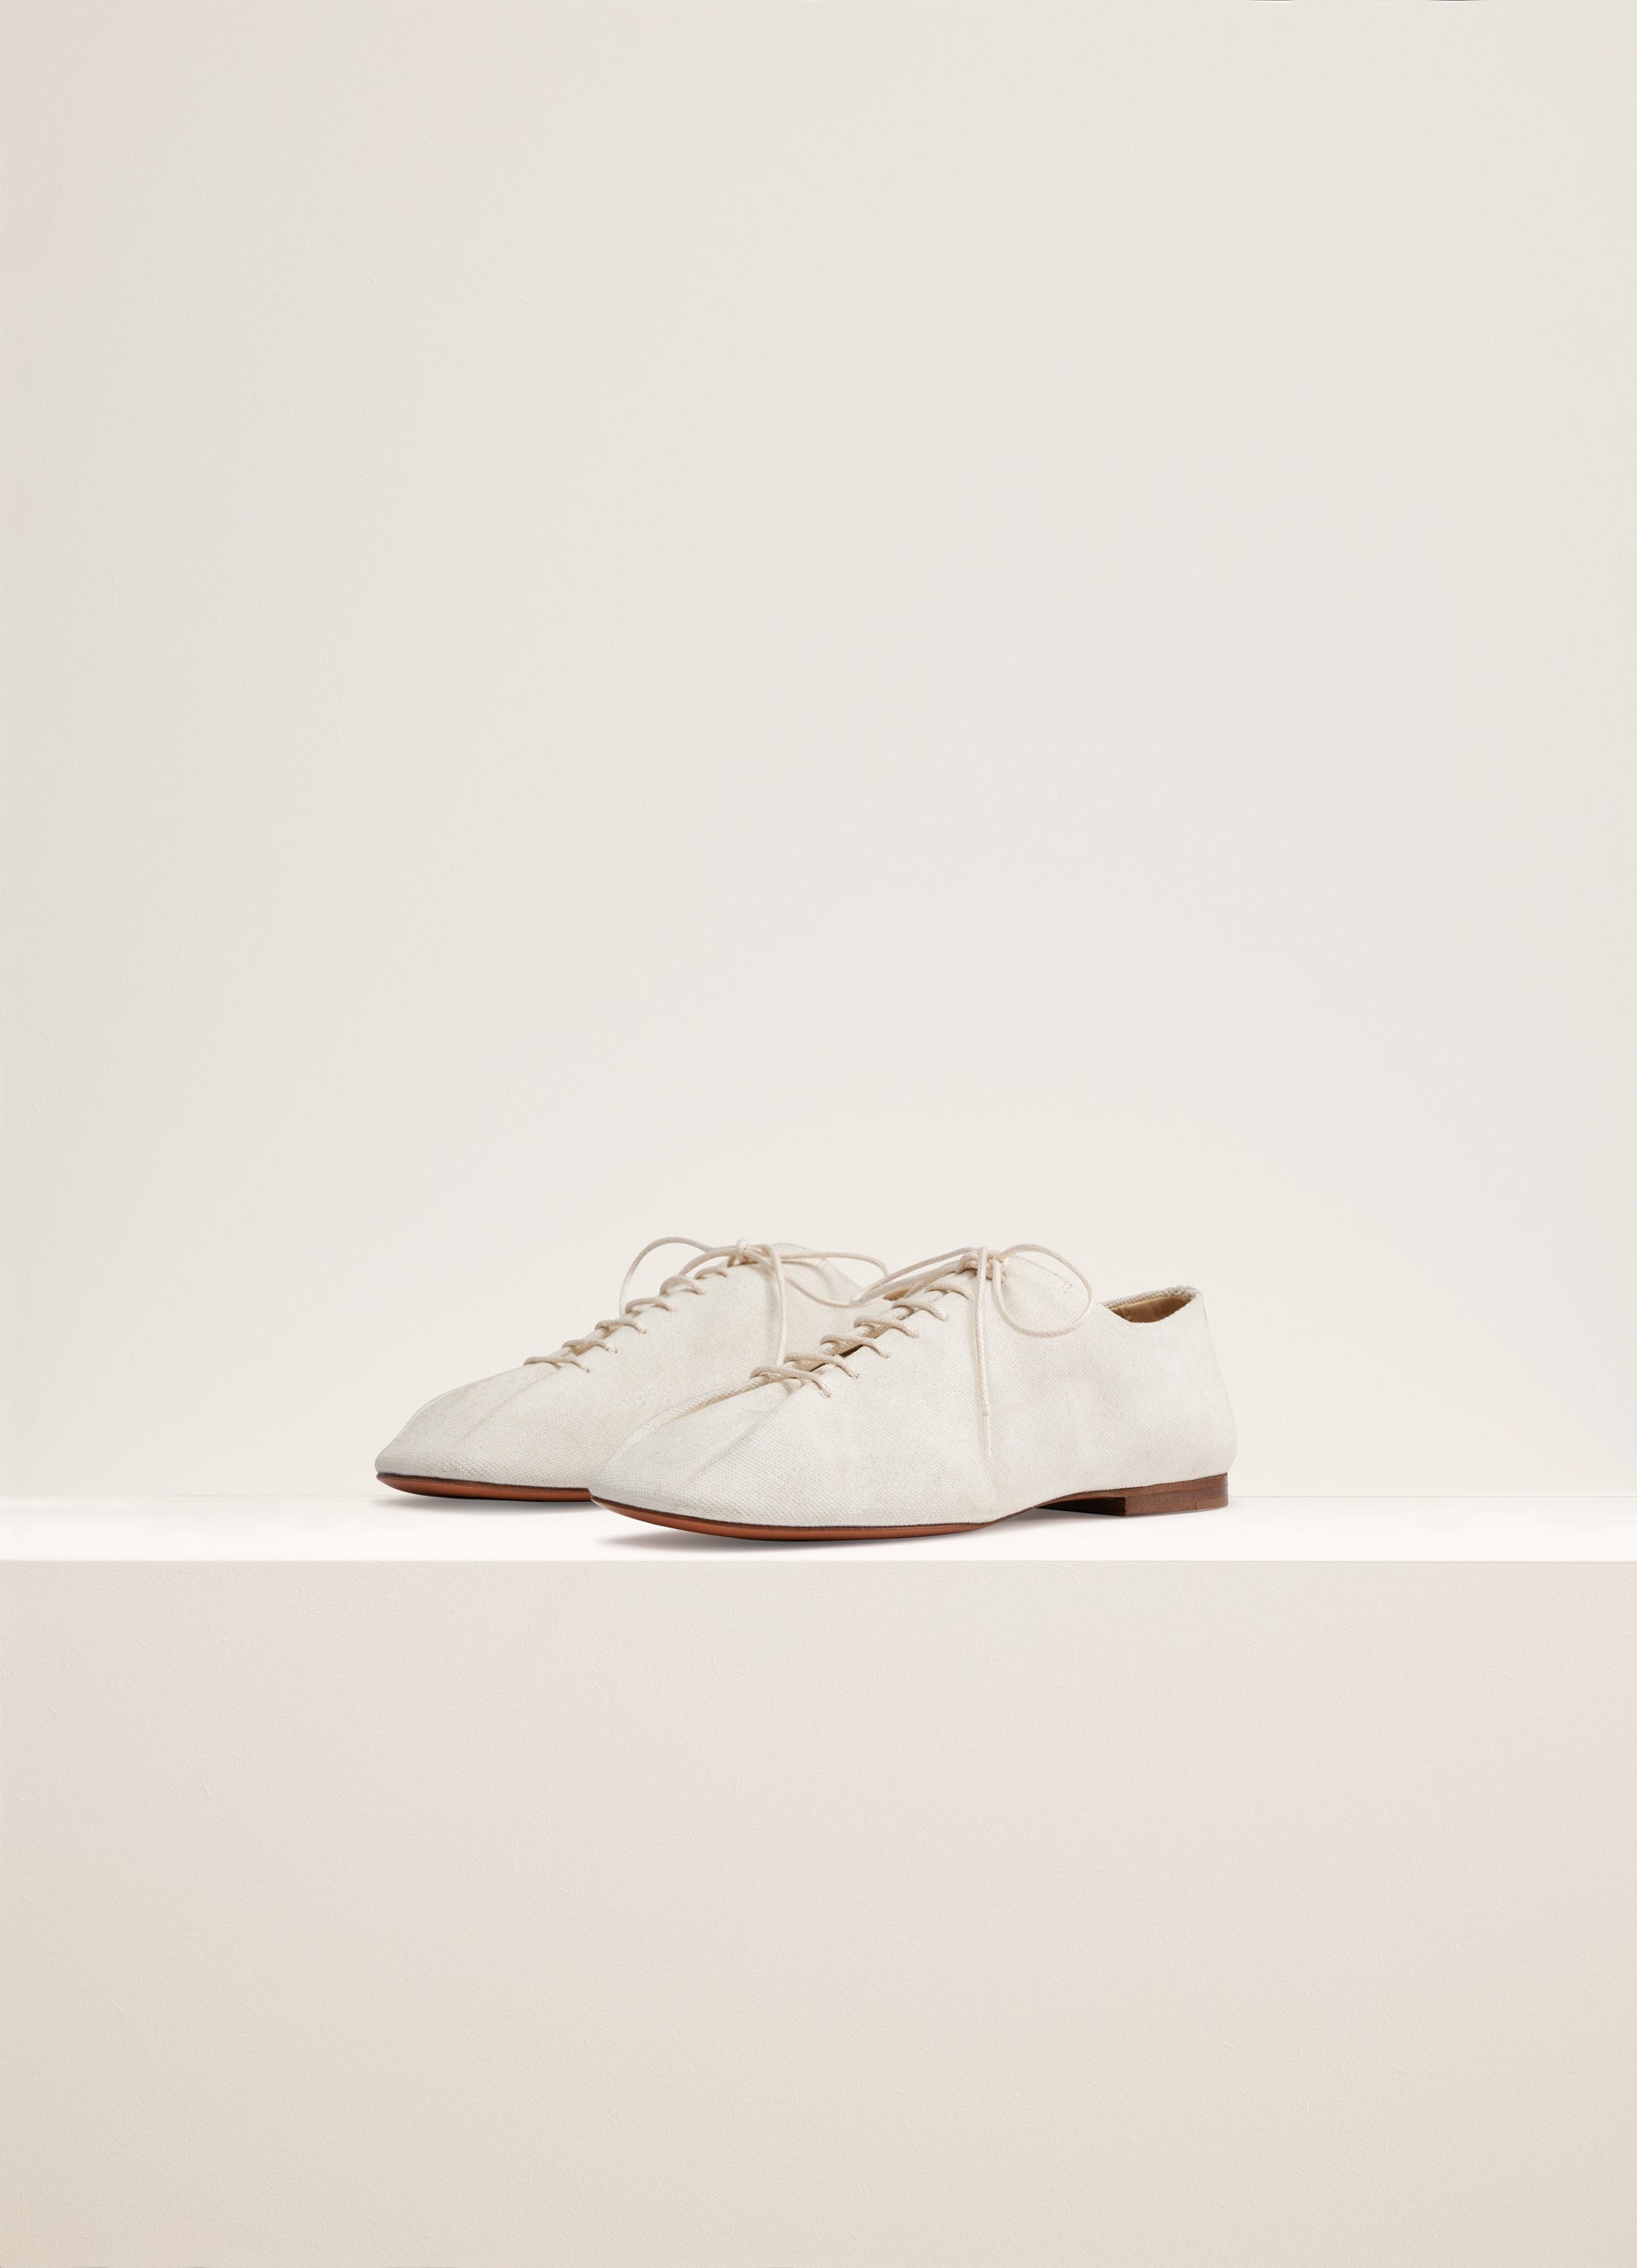 Dirty White Souris Flat Classic Derbies in Heavy Denim | LEMAIRE